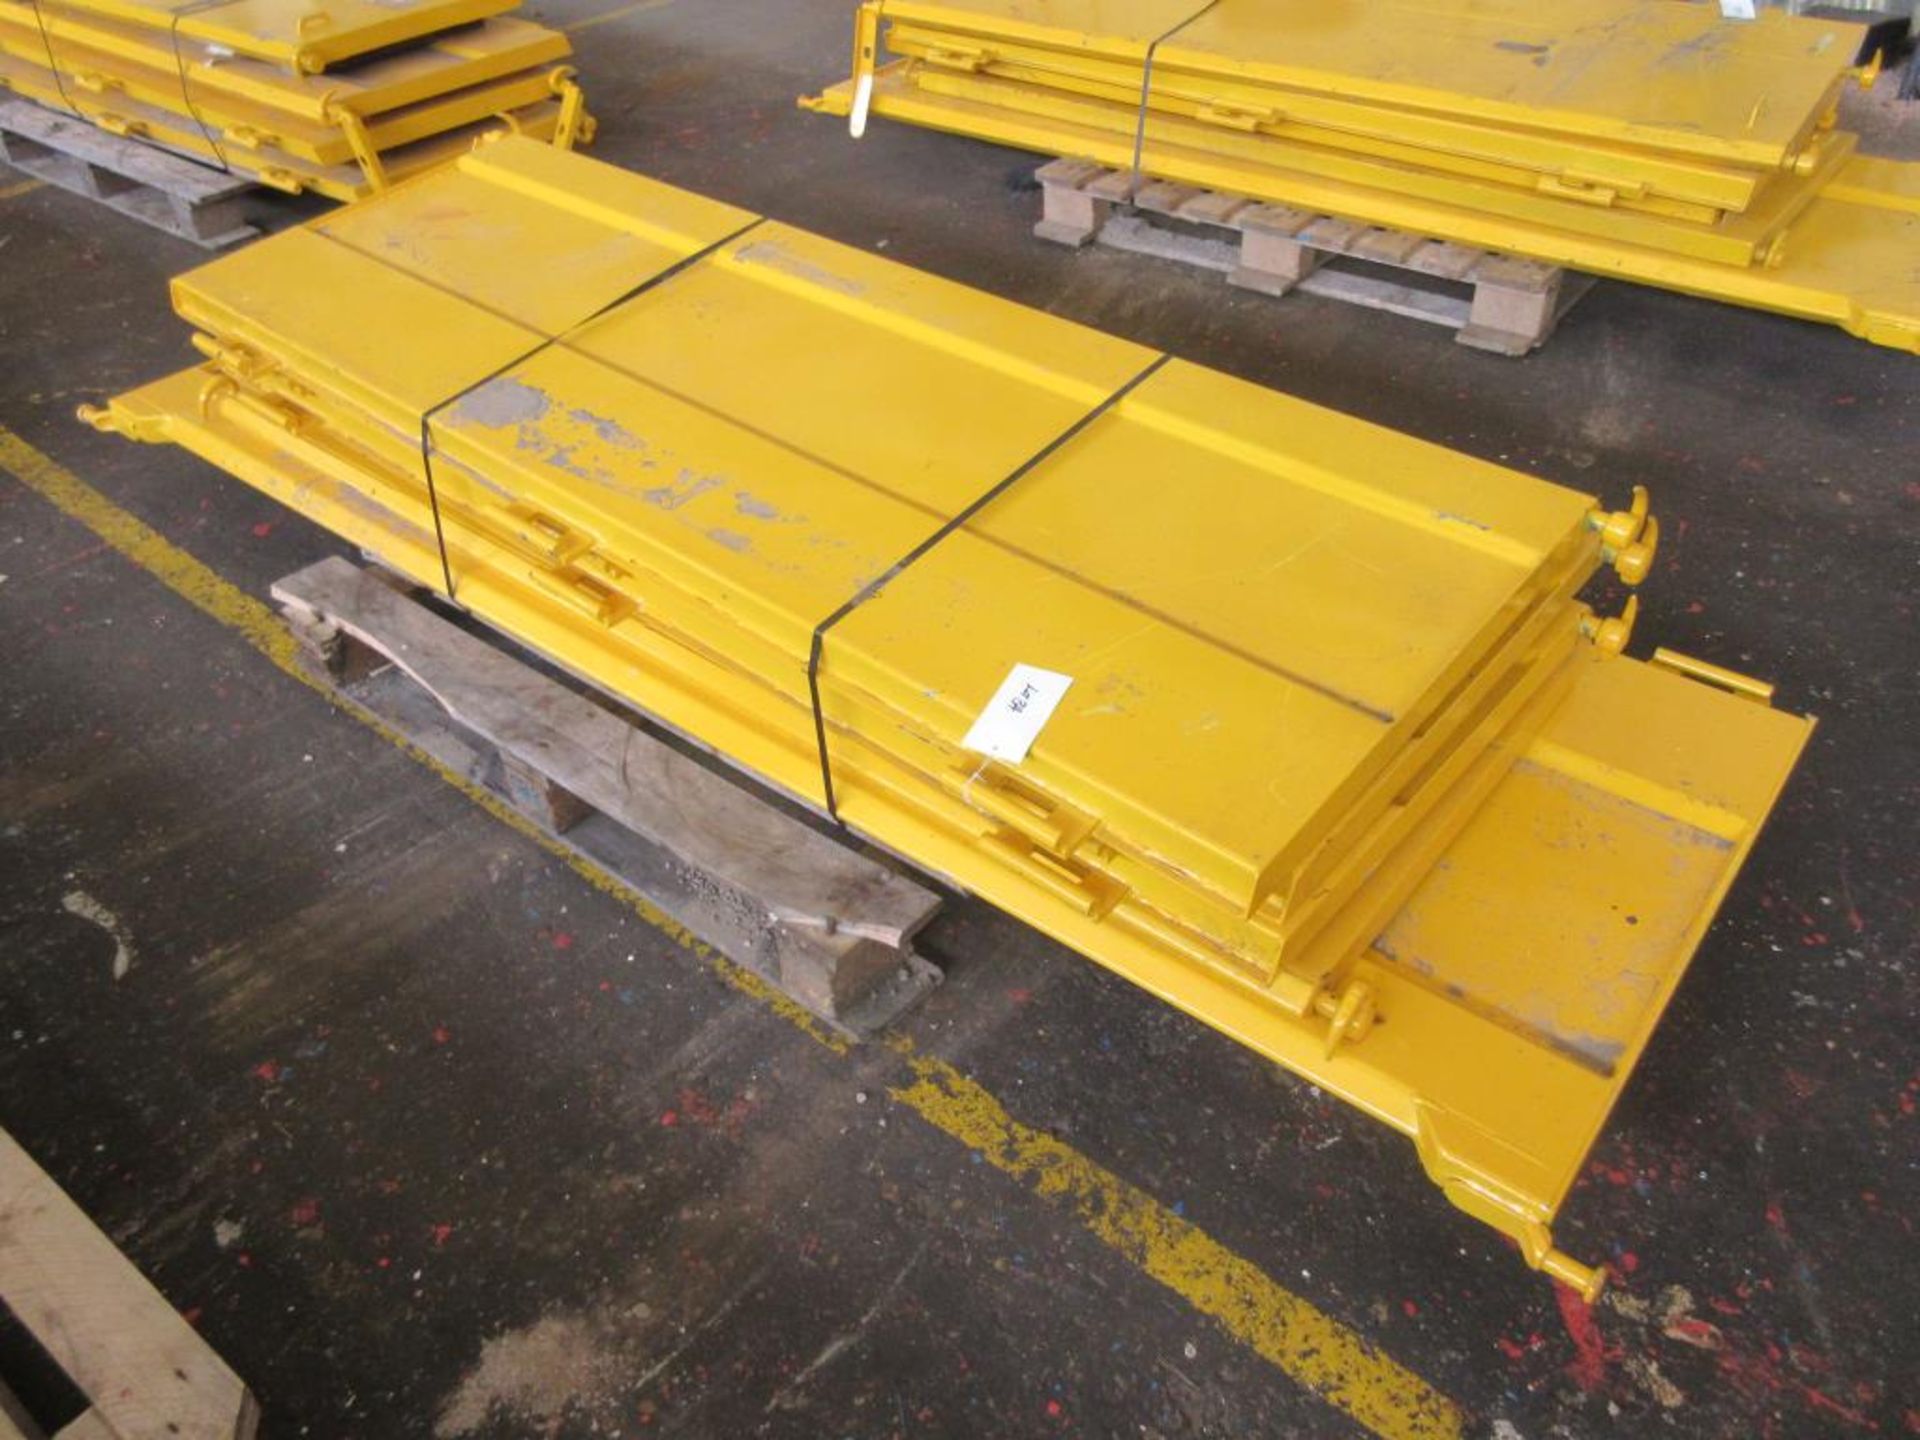 Econ tailgate and 4no. steel dropside sections (appearing unused)